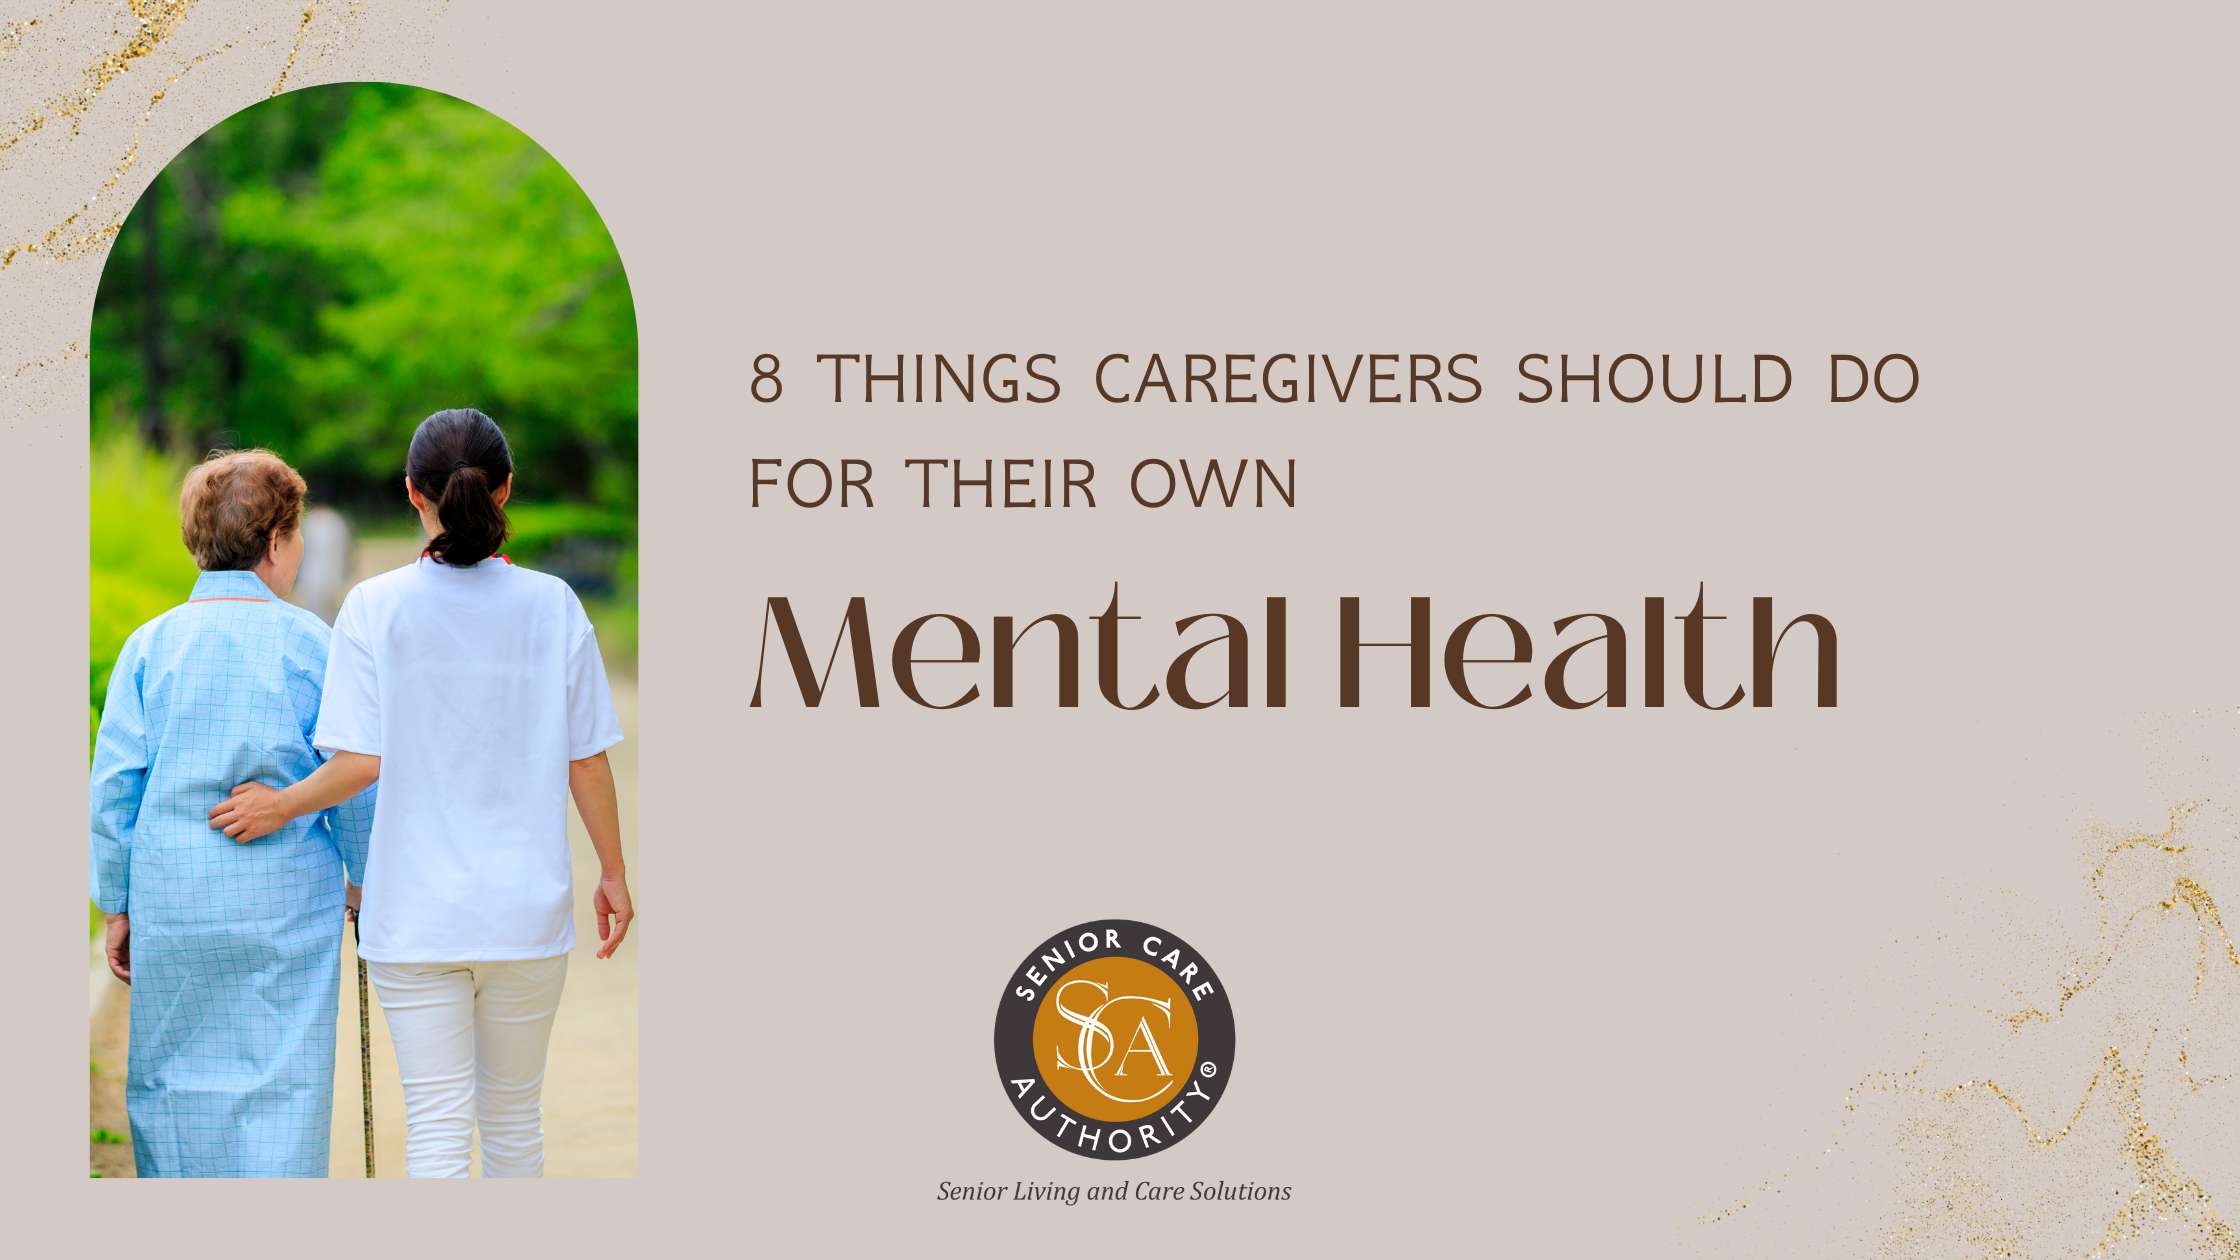 8 Things Caregivers Should Do For Their Own Mental Health